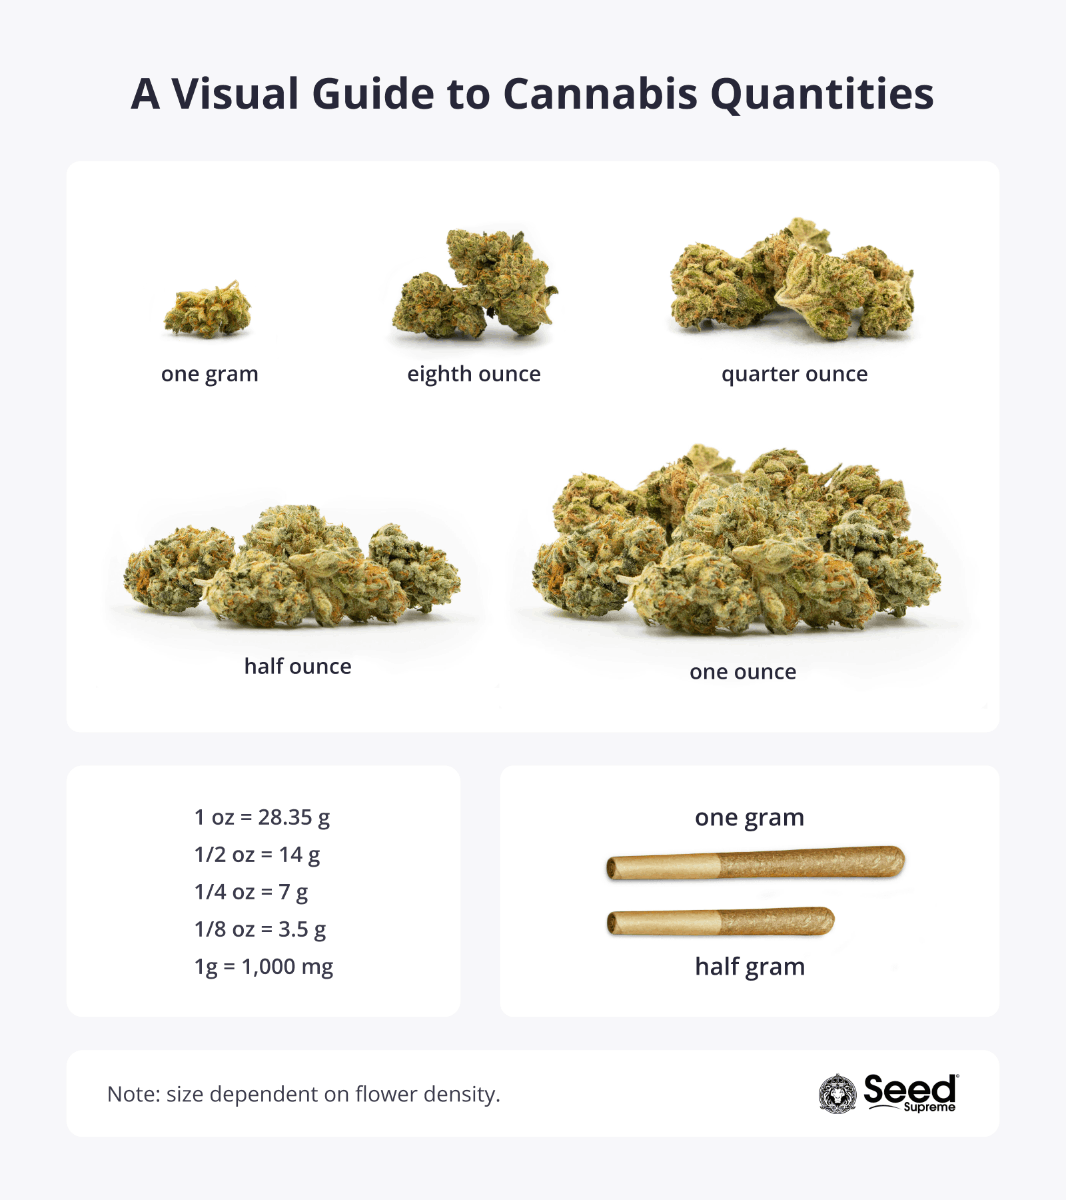 cannabis quantities and weed measurements